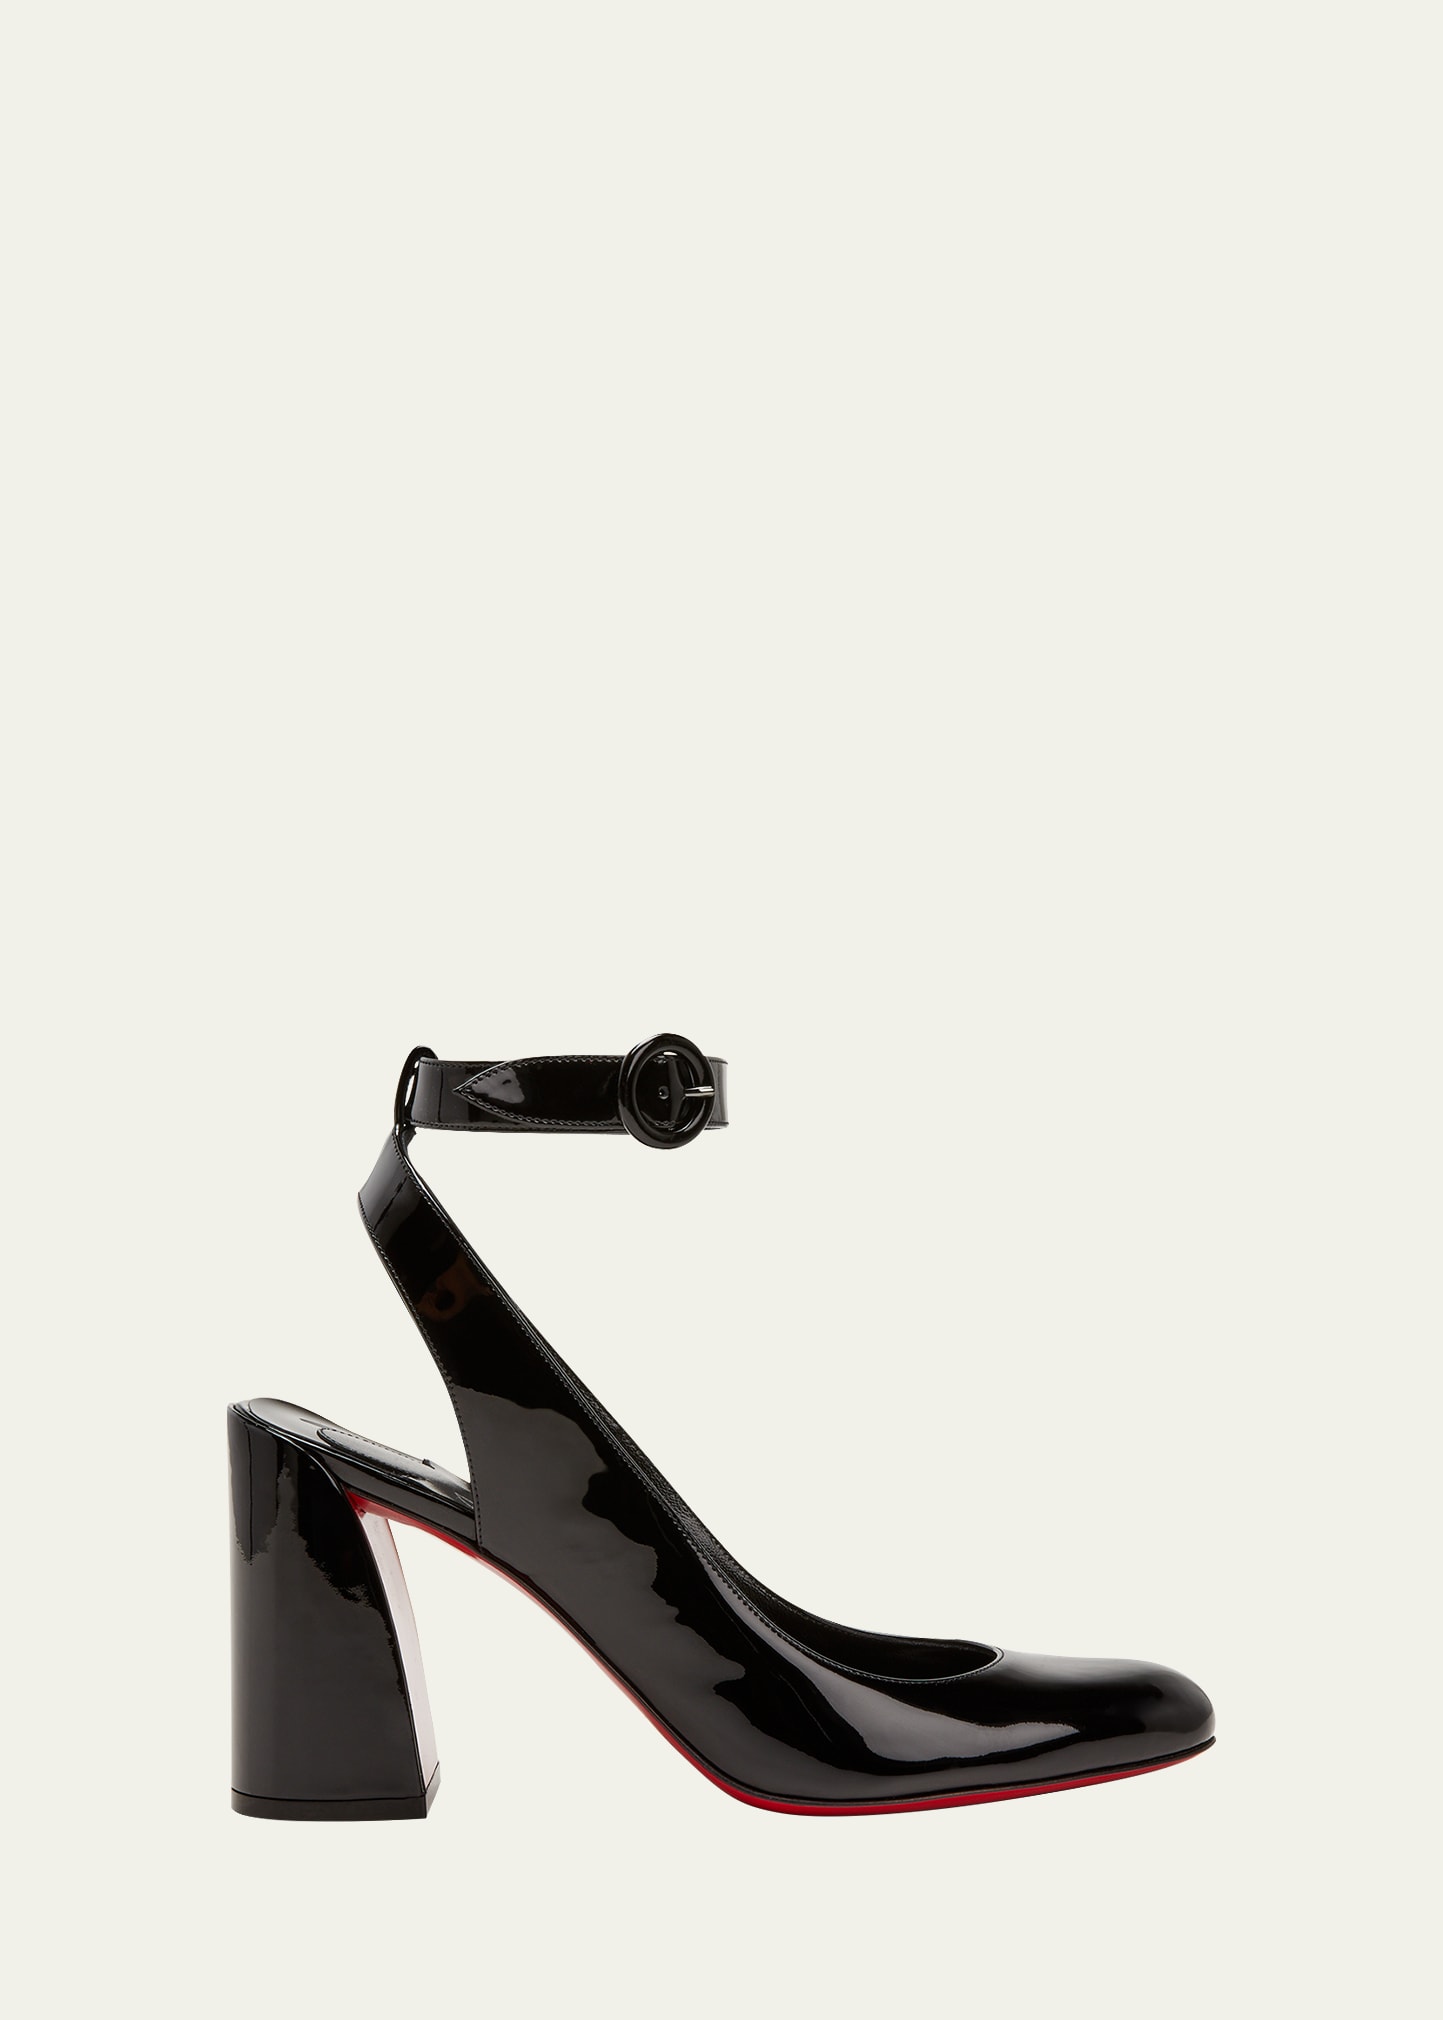 Christian Louboutin Miss Sab Patent Red Sole Pumps